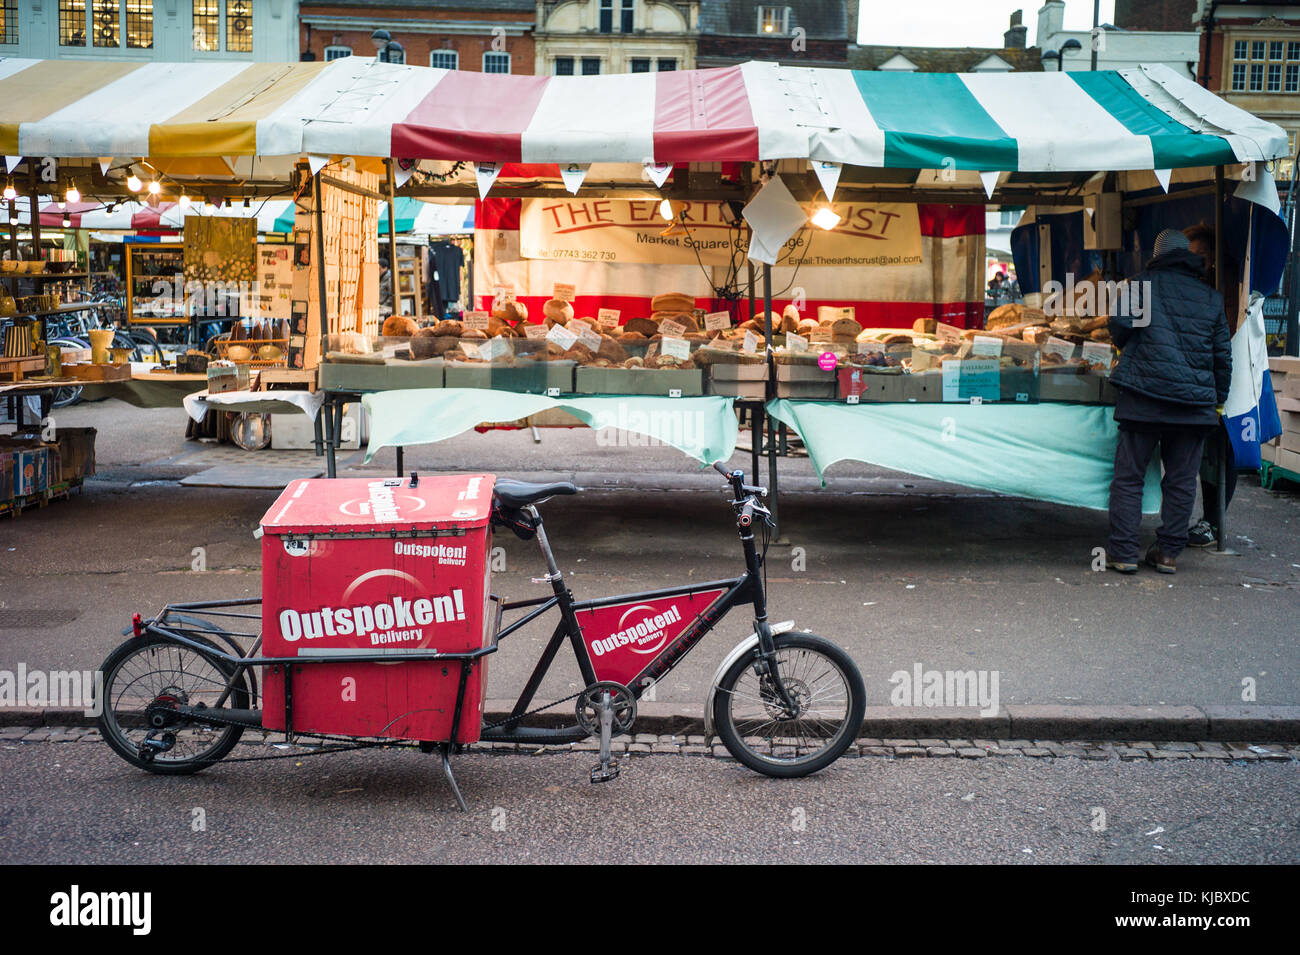 Eco Delivery - A cargo bike belonging to the Outspoken last mile delivery company parked in Cambridge Market in the historic centre of Cambridge UK. Stock Photo